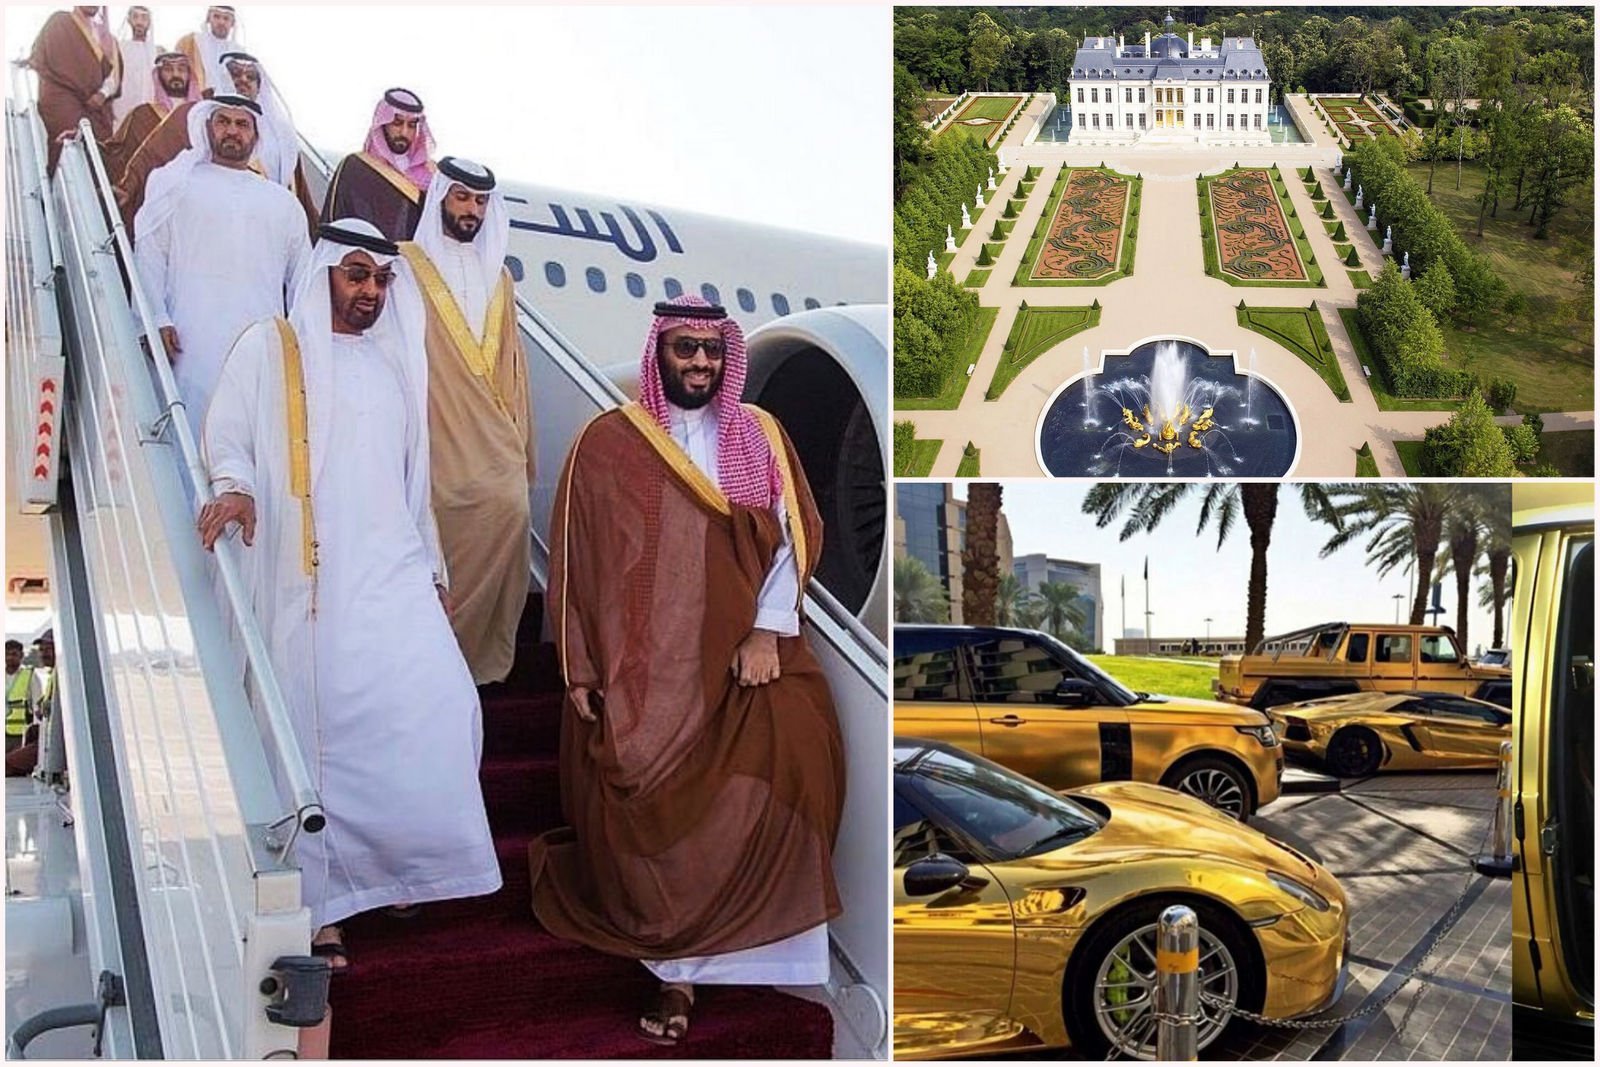 The insanely luxurious lifestyle of the Saudi Royal family